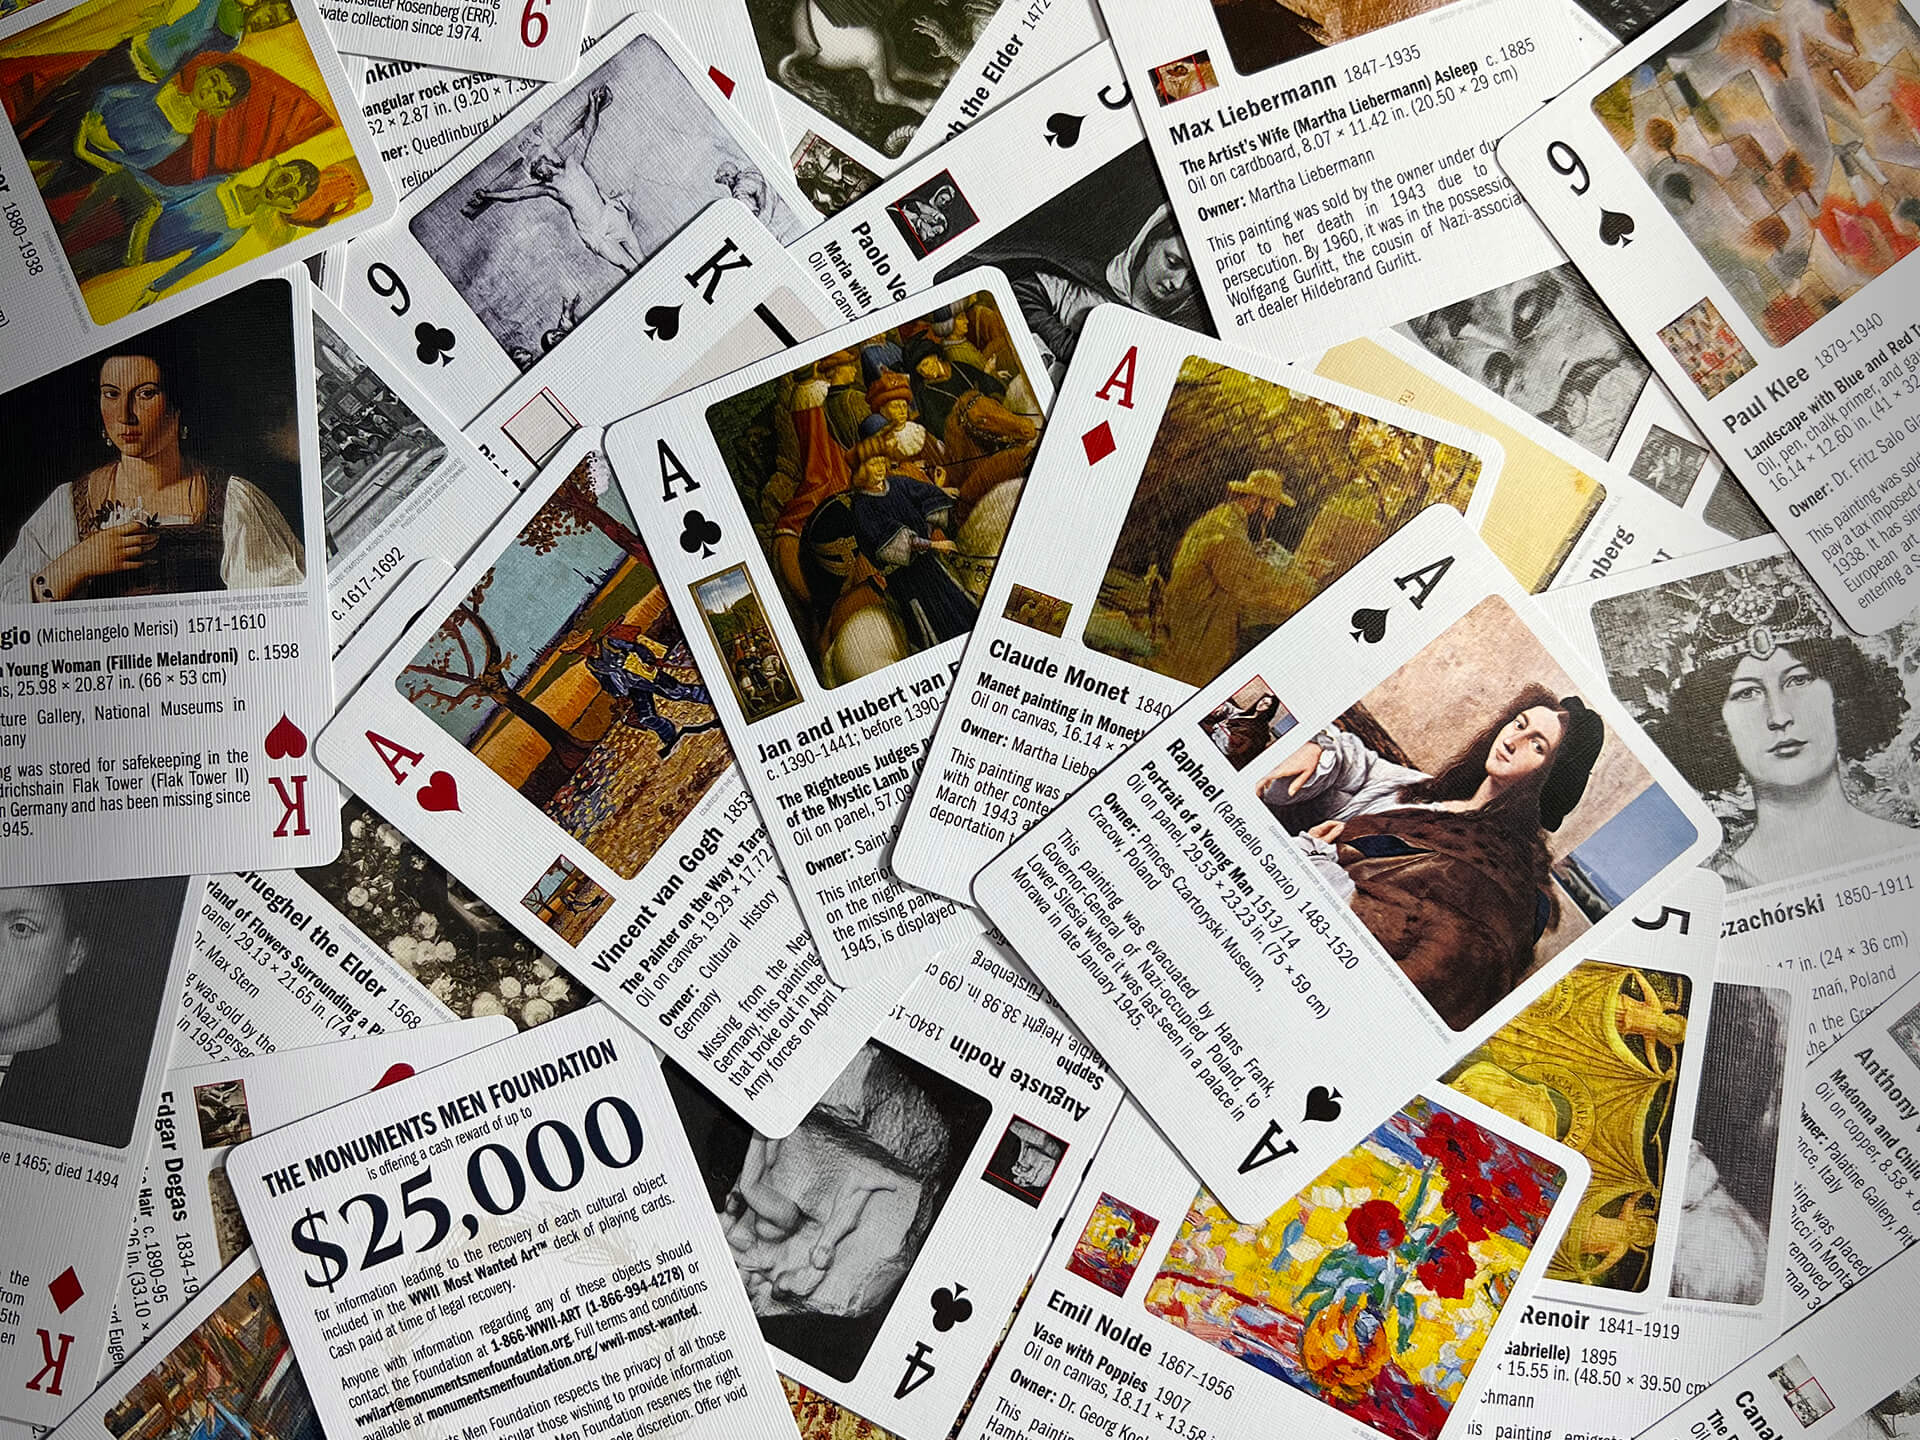 WWII Most Wanted Art™ playing cards by the Monuments Men Foundation